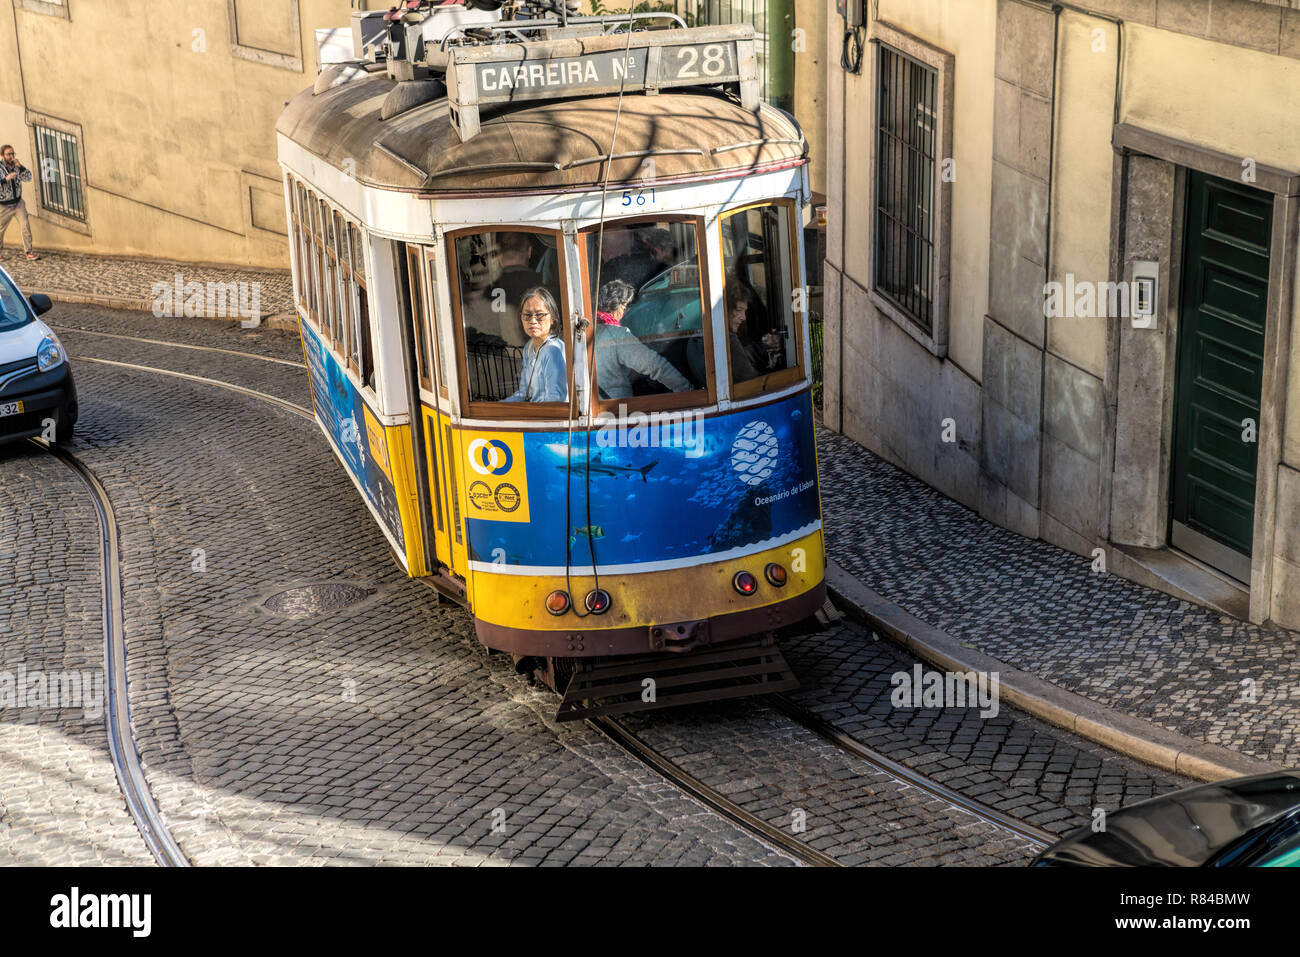 Street view with famous retro tourist tram in the old town of Lisbon city, Portugal Stock Photo